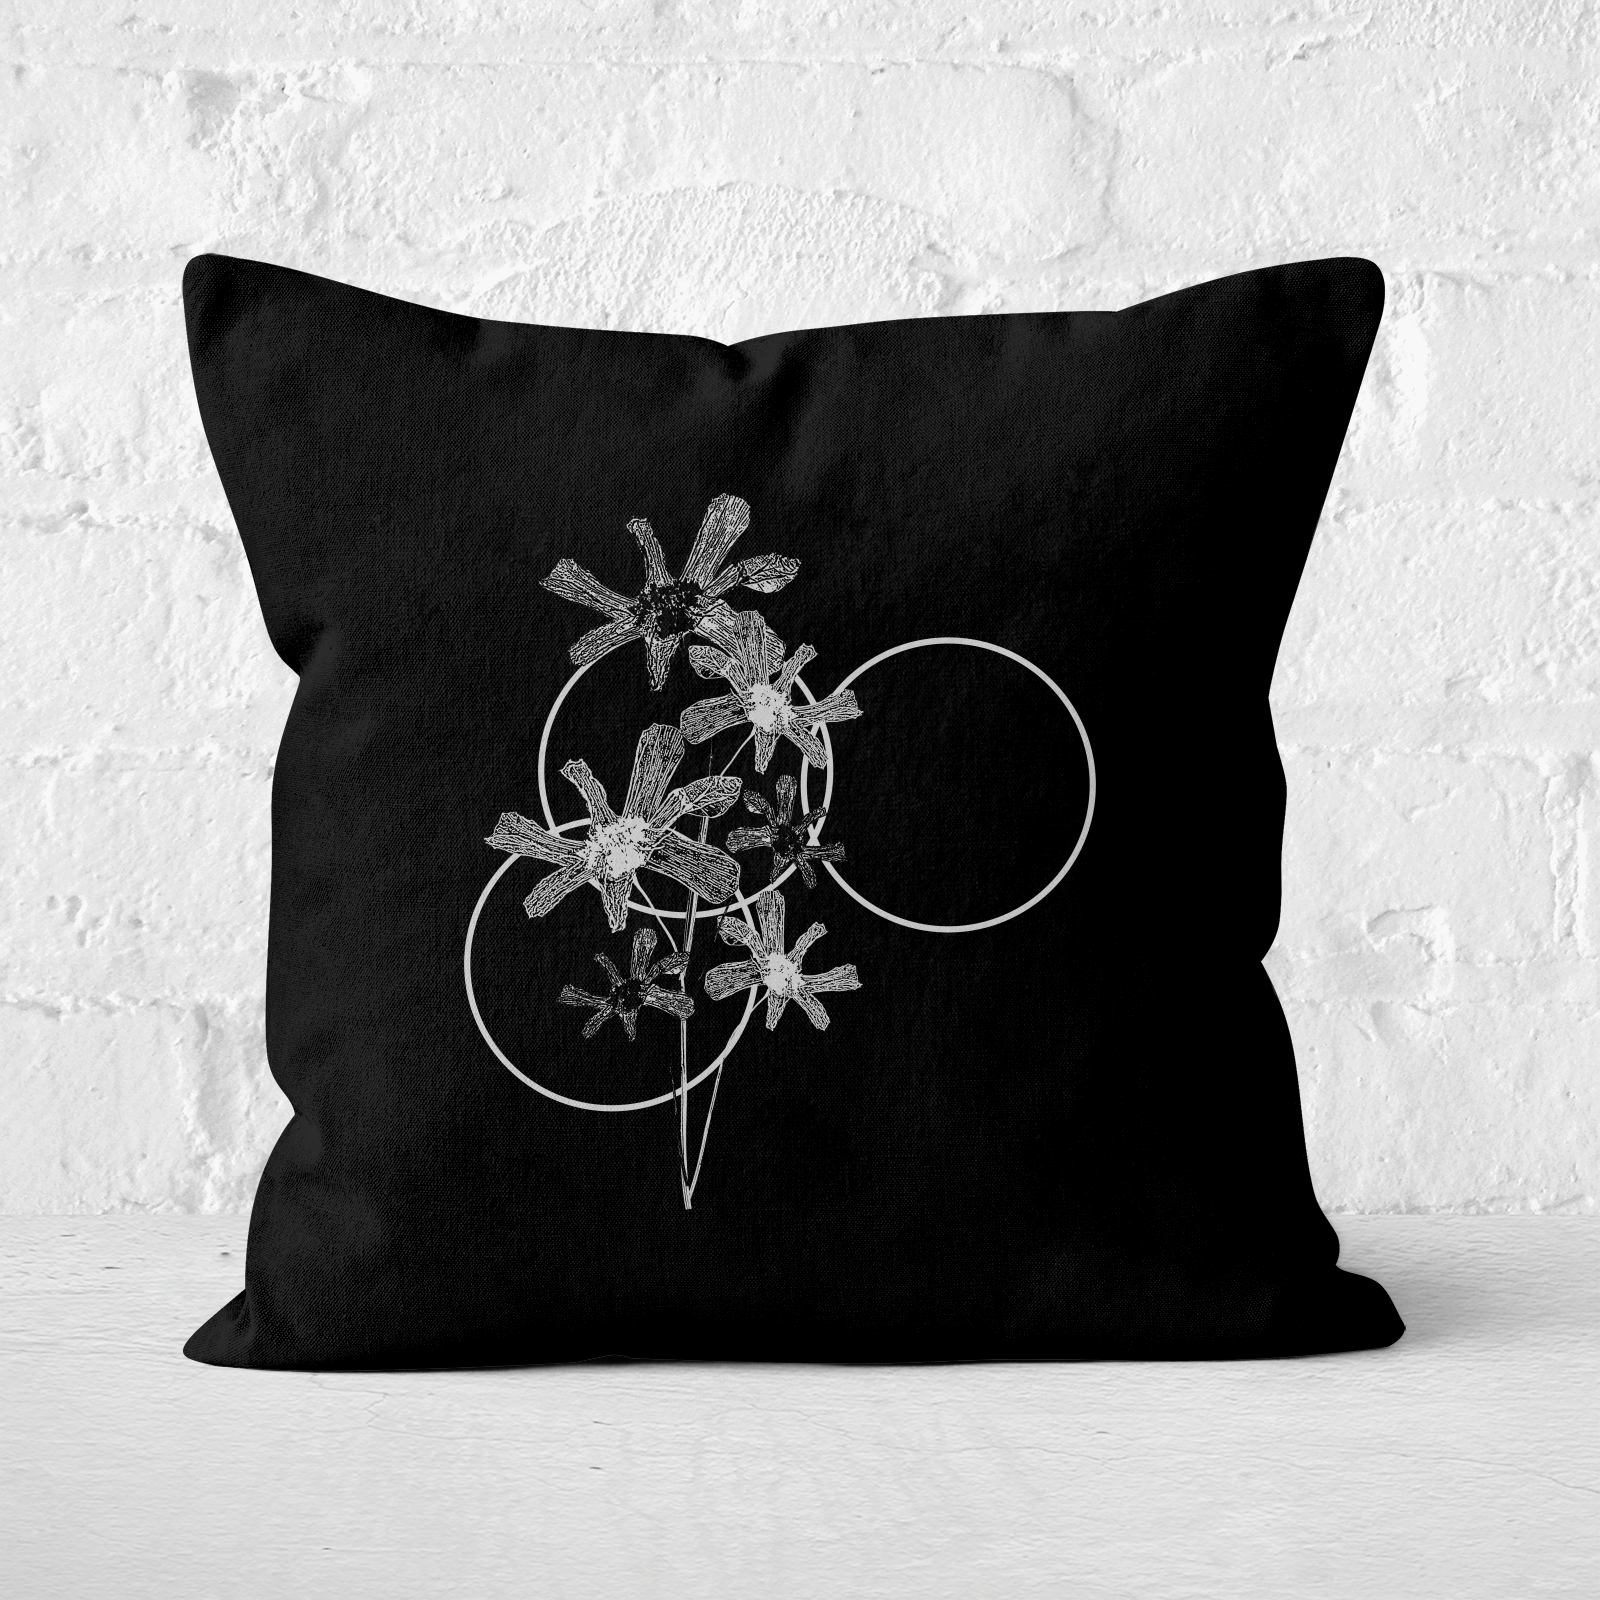 Pressed Flowers Monochrome Tone Flowers and Circles Square Cushion - 60x60cm - Soft Touch